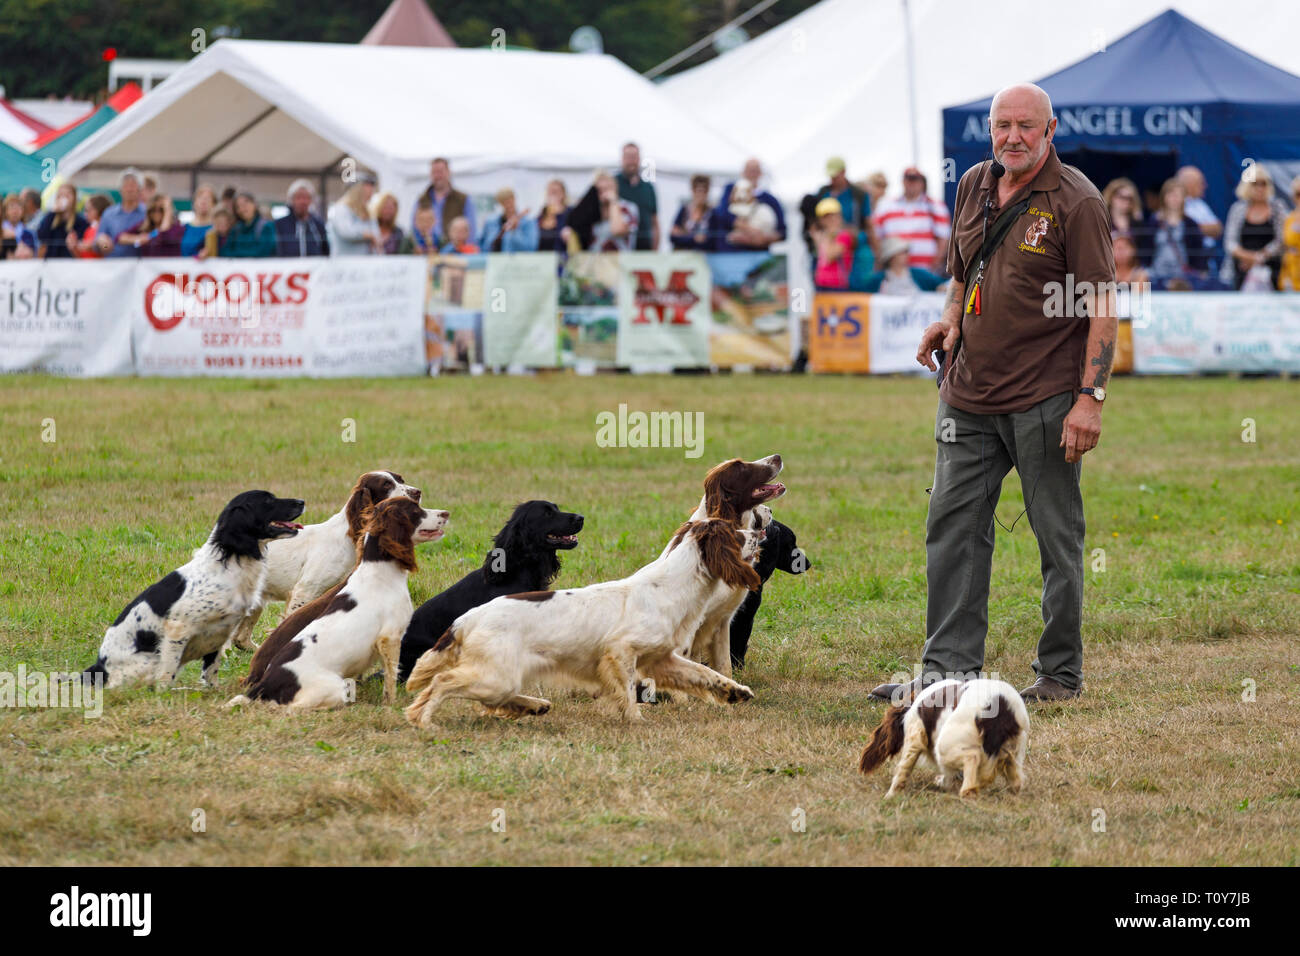 Wills Spaniels giving a demonstration in the main ring at the 2018 Aylsham Agricultural Show, Norfolk, UK. Stock Photo